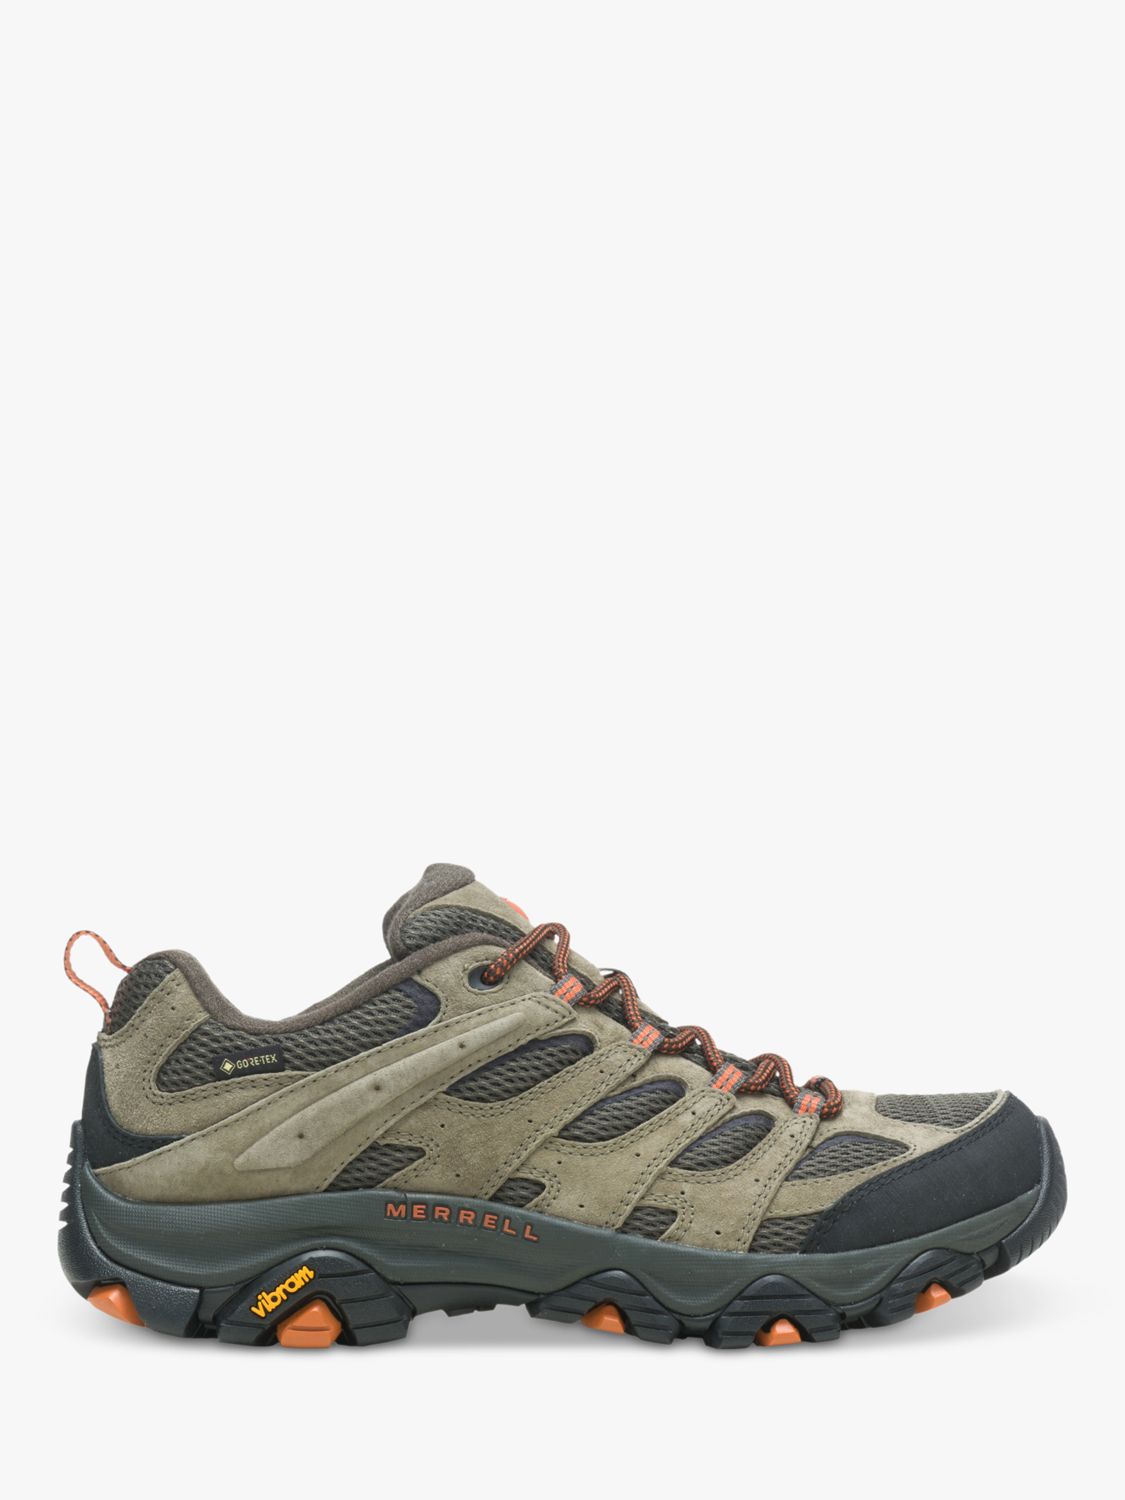 Merrell Moab Waterproof Hiking Shoes at Lewis & Partners